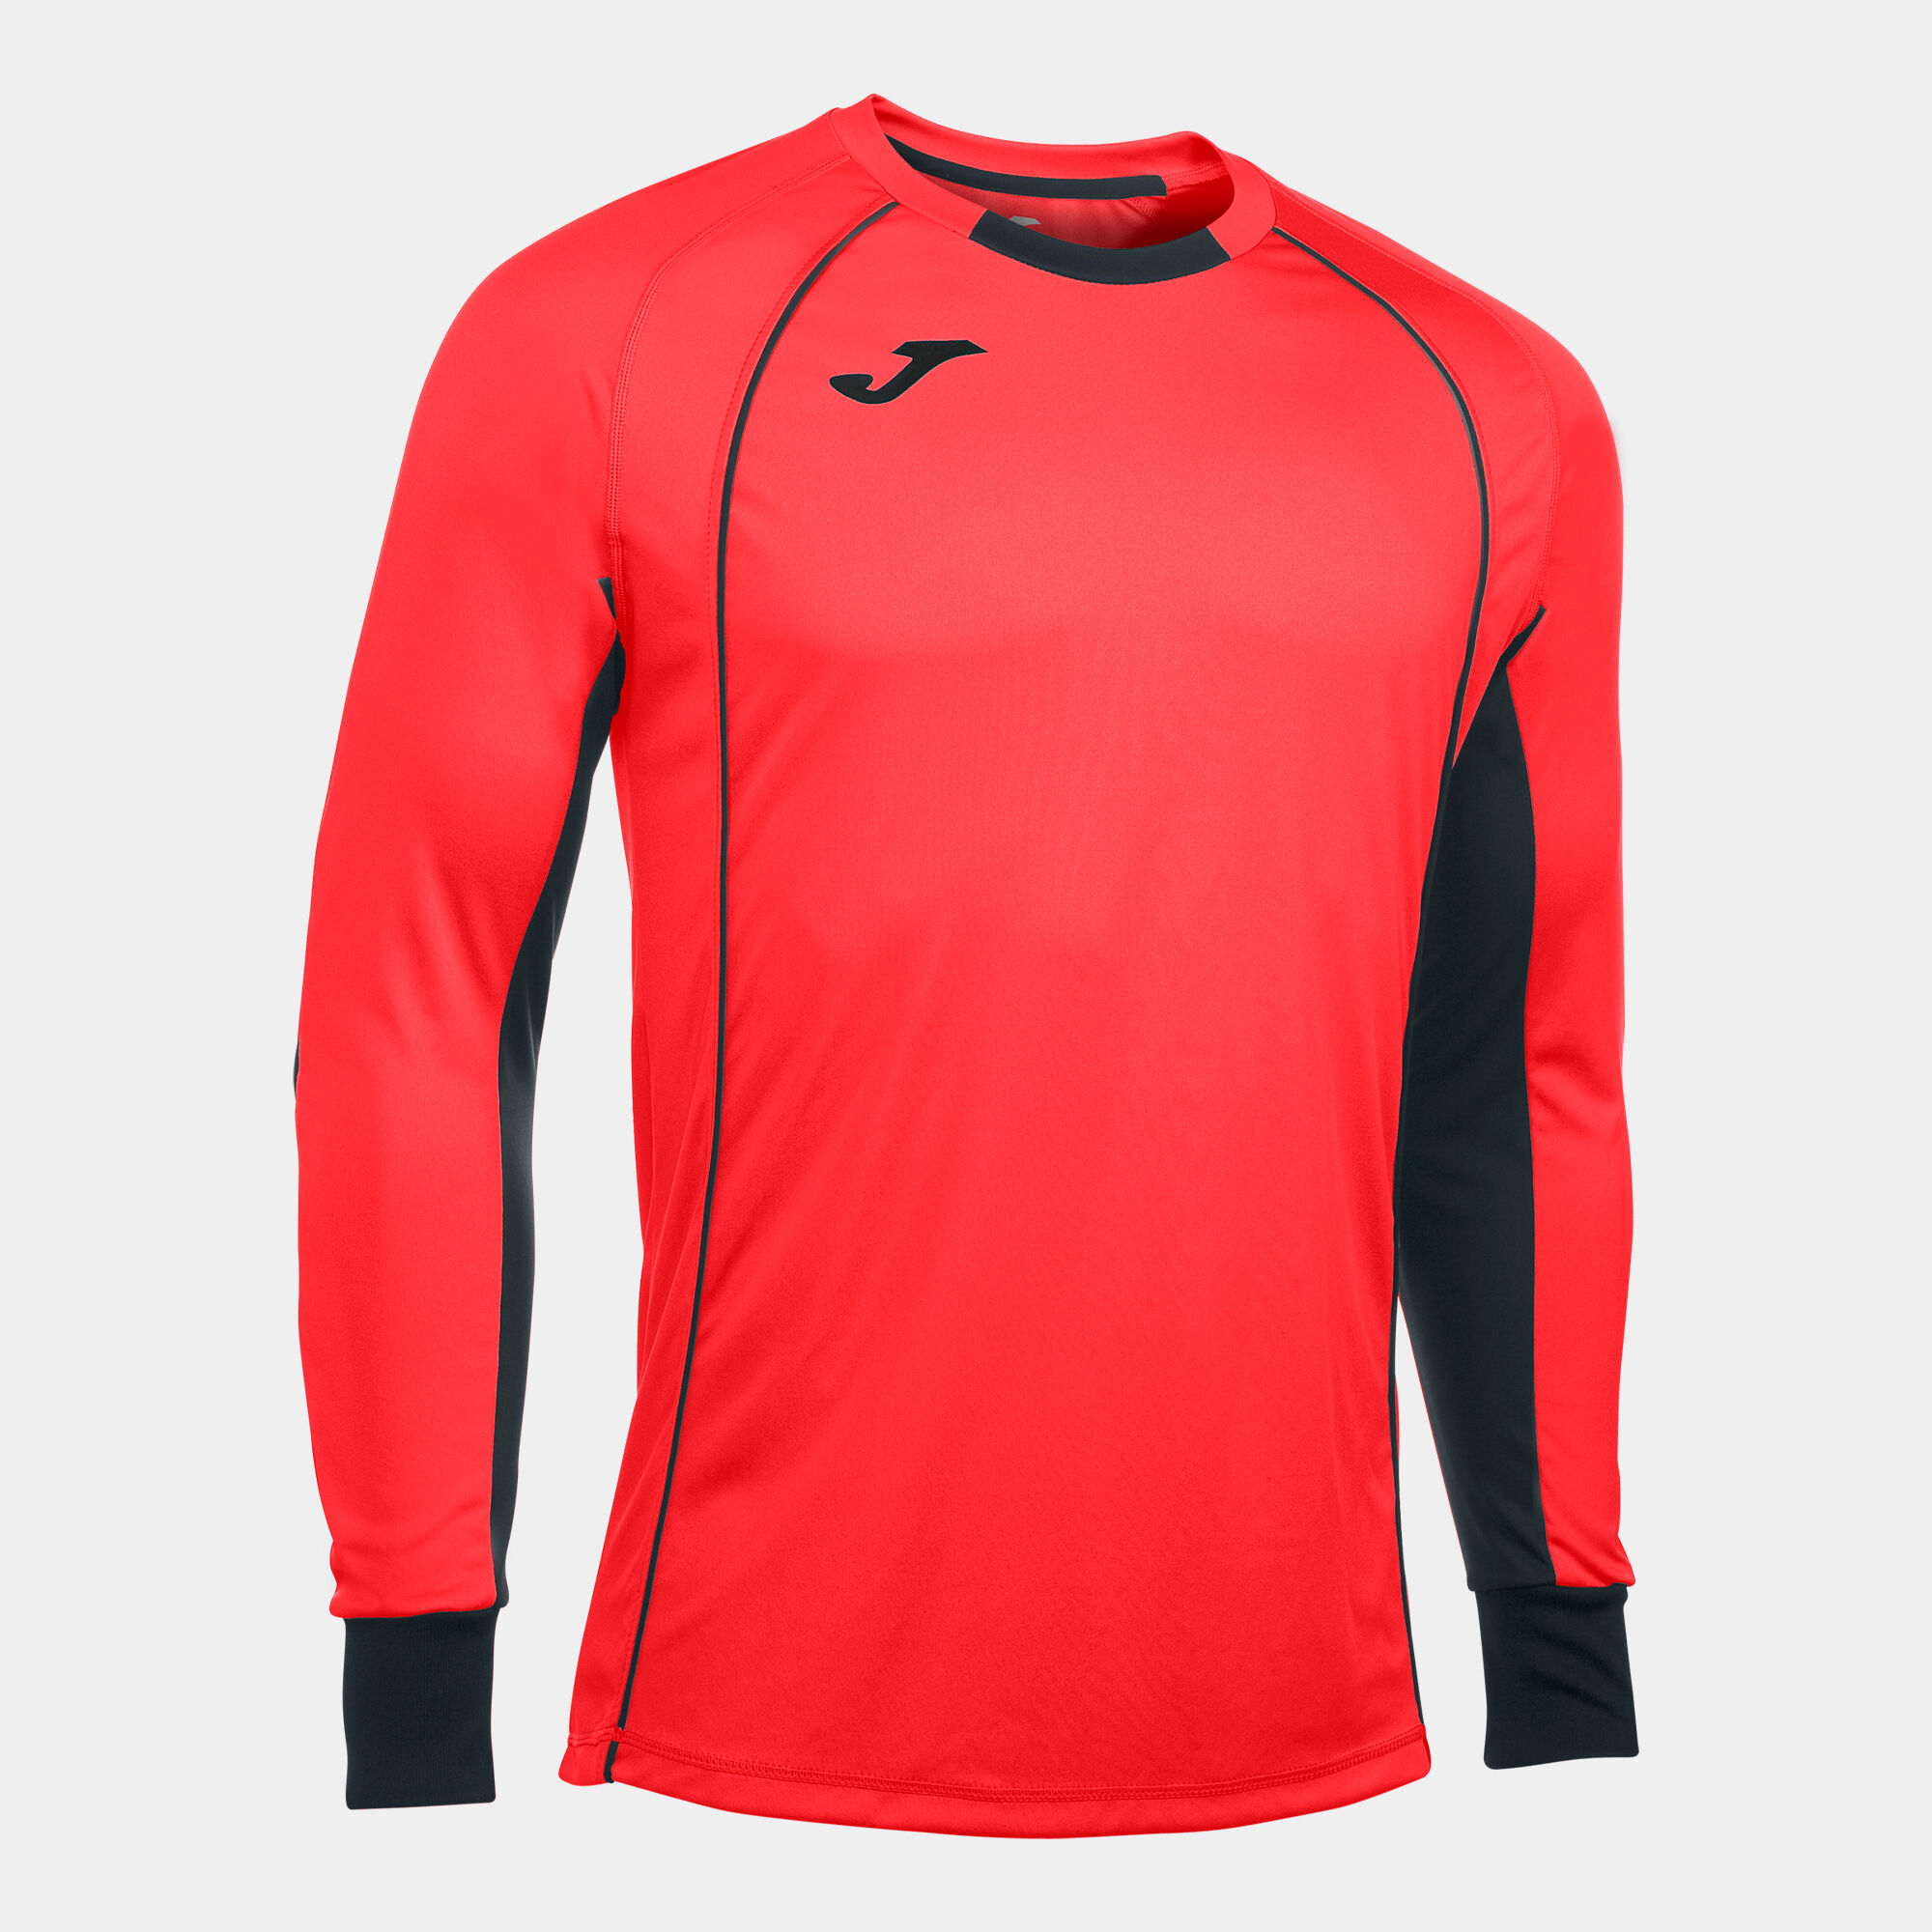 Maillot manches longues homme Protec corail fluo